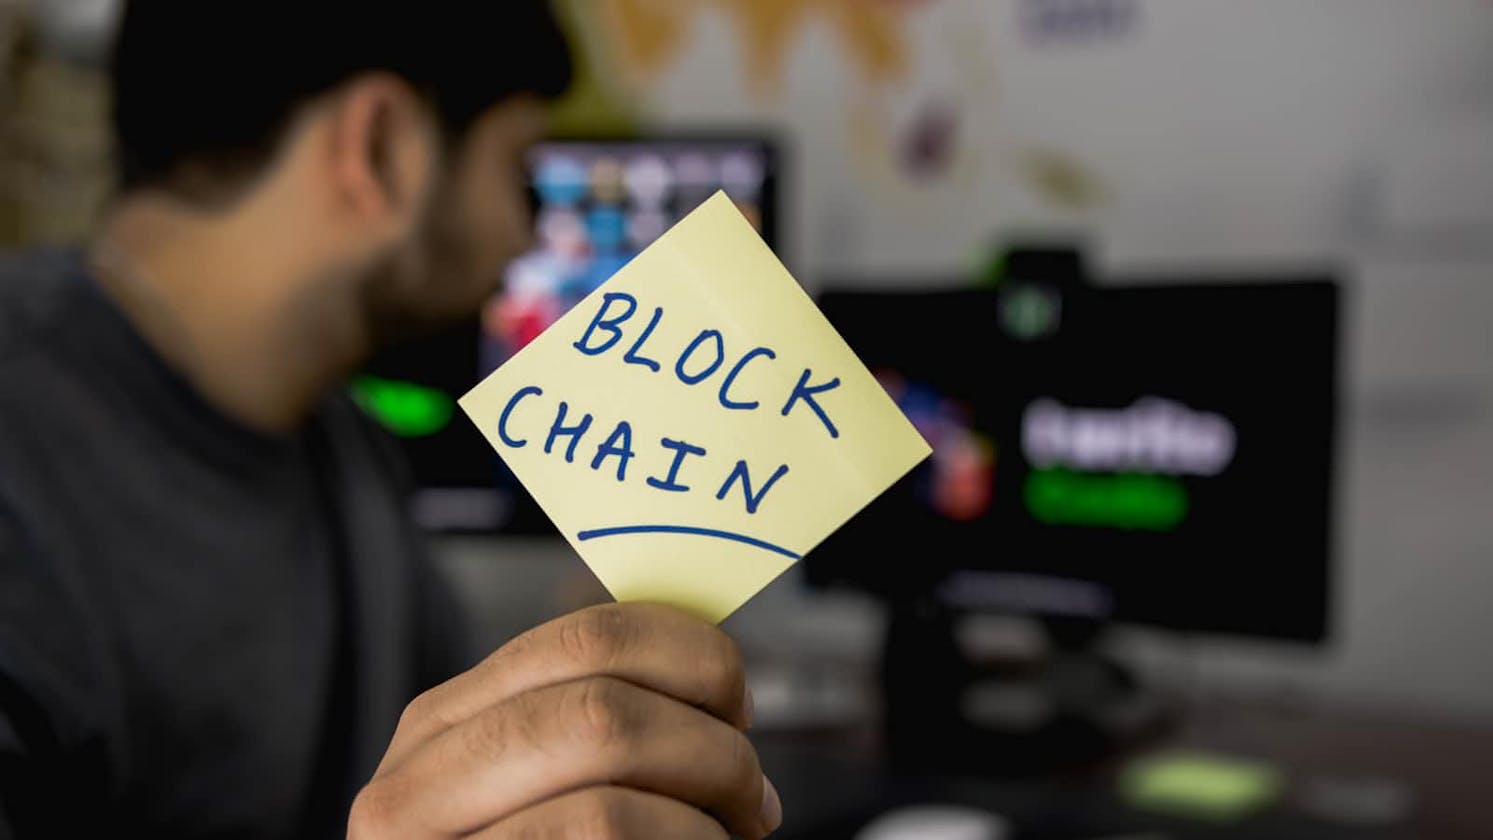 Blockchain Explained: Easy Guide with Real-World Uses